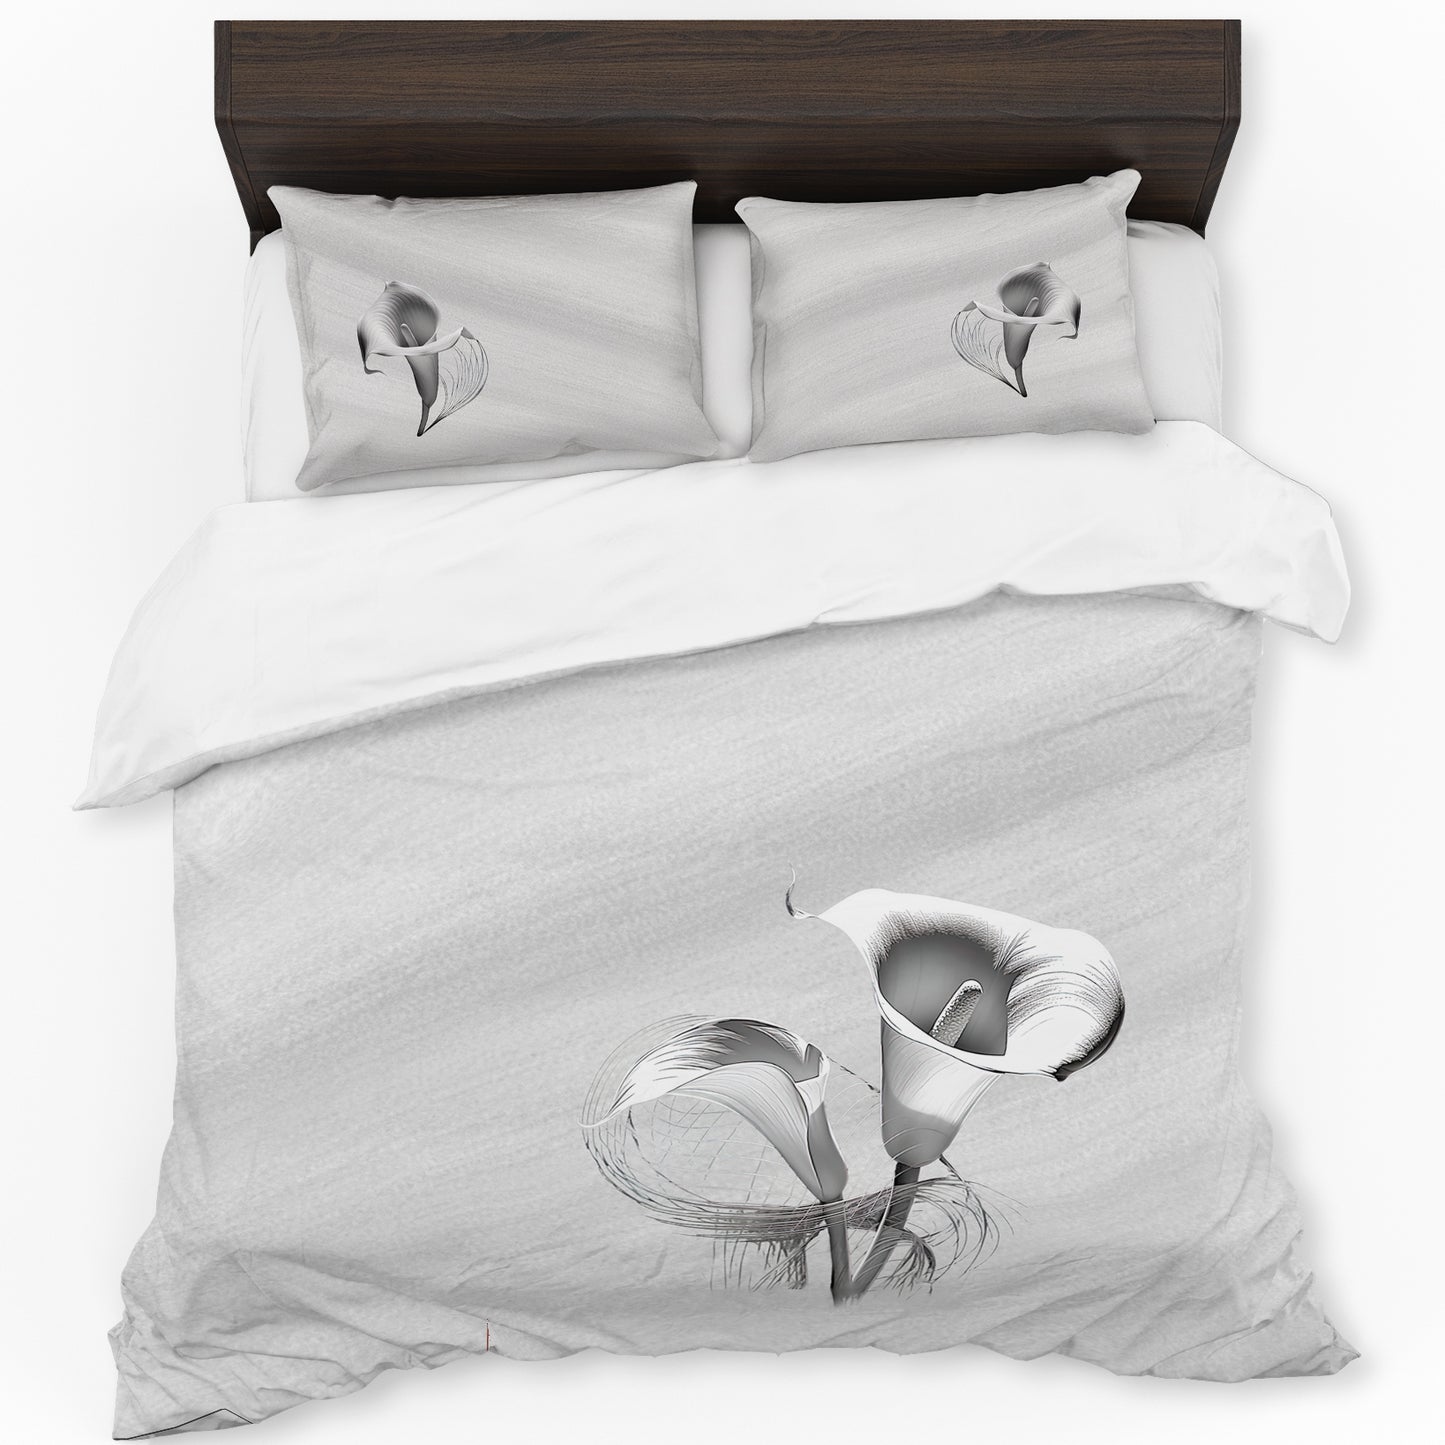 Arum Lilly on Grey Duvet Cover Set